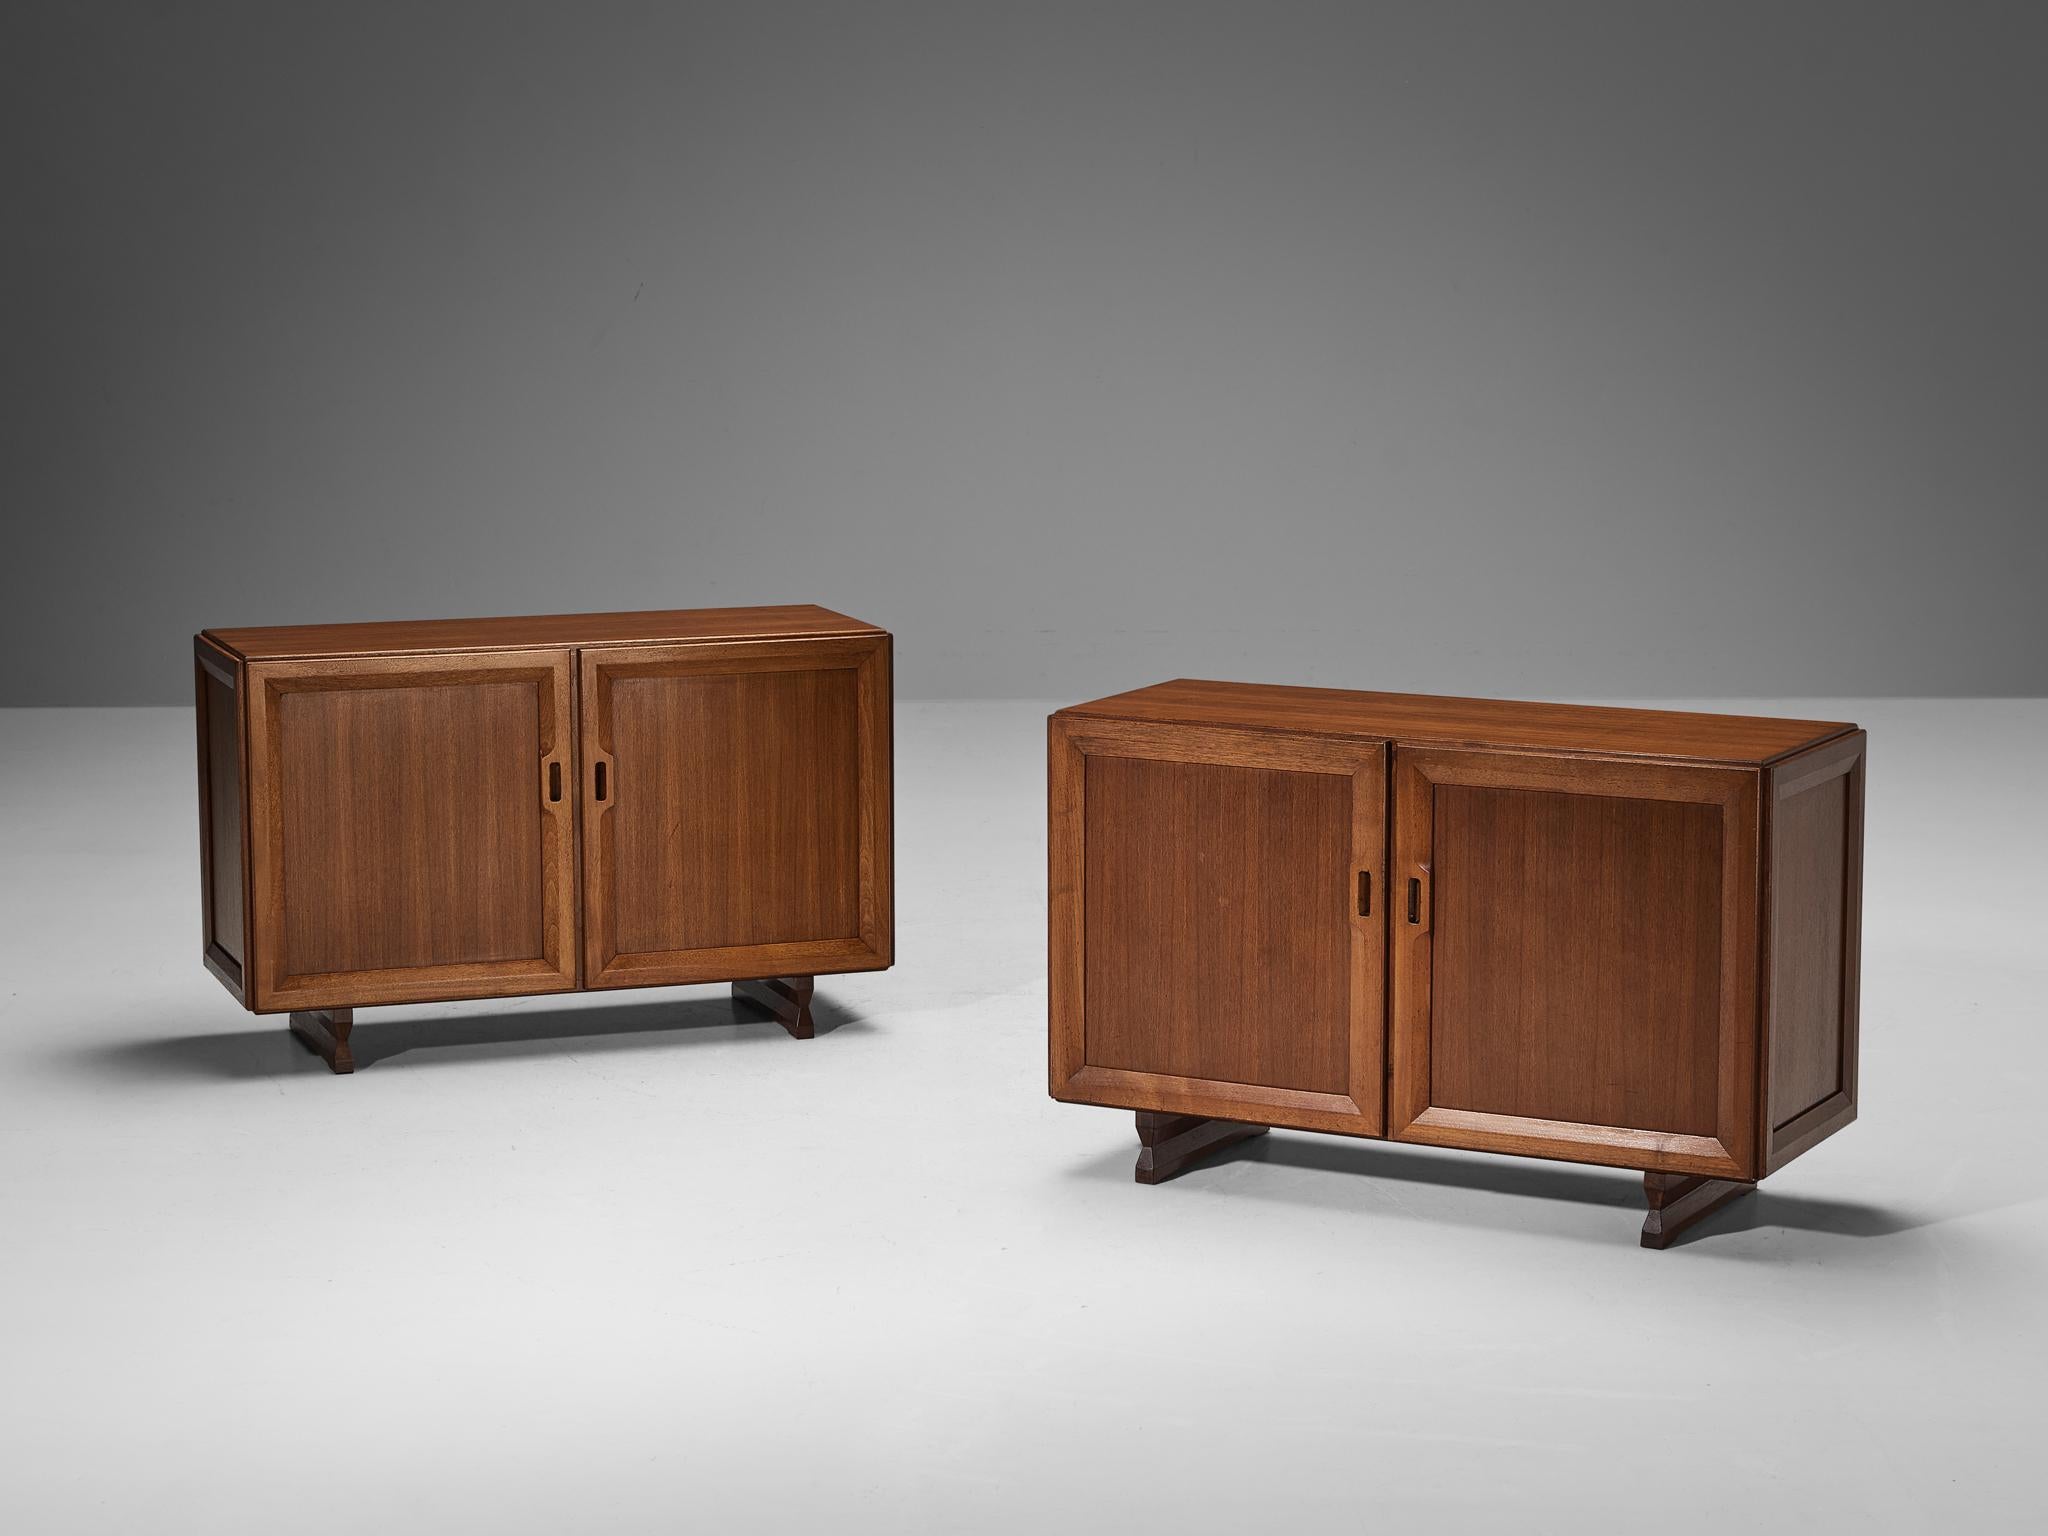 Franco Albini for Poggi, cabinets, model MB51, teak, Italy, circa 1957. 

Well-designed pair of cabinets by Franco Albini for Poggi, which features a simplistic design with sharp lines. The corpus rests on sculptural legs that elevate the cabinet in